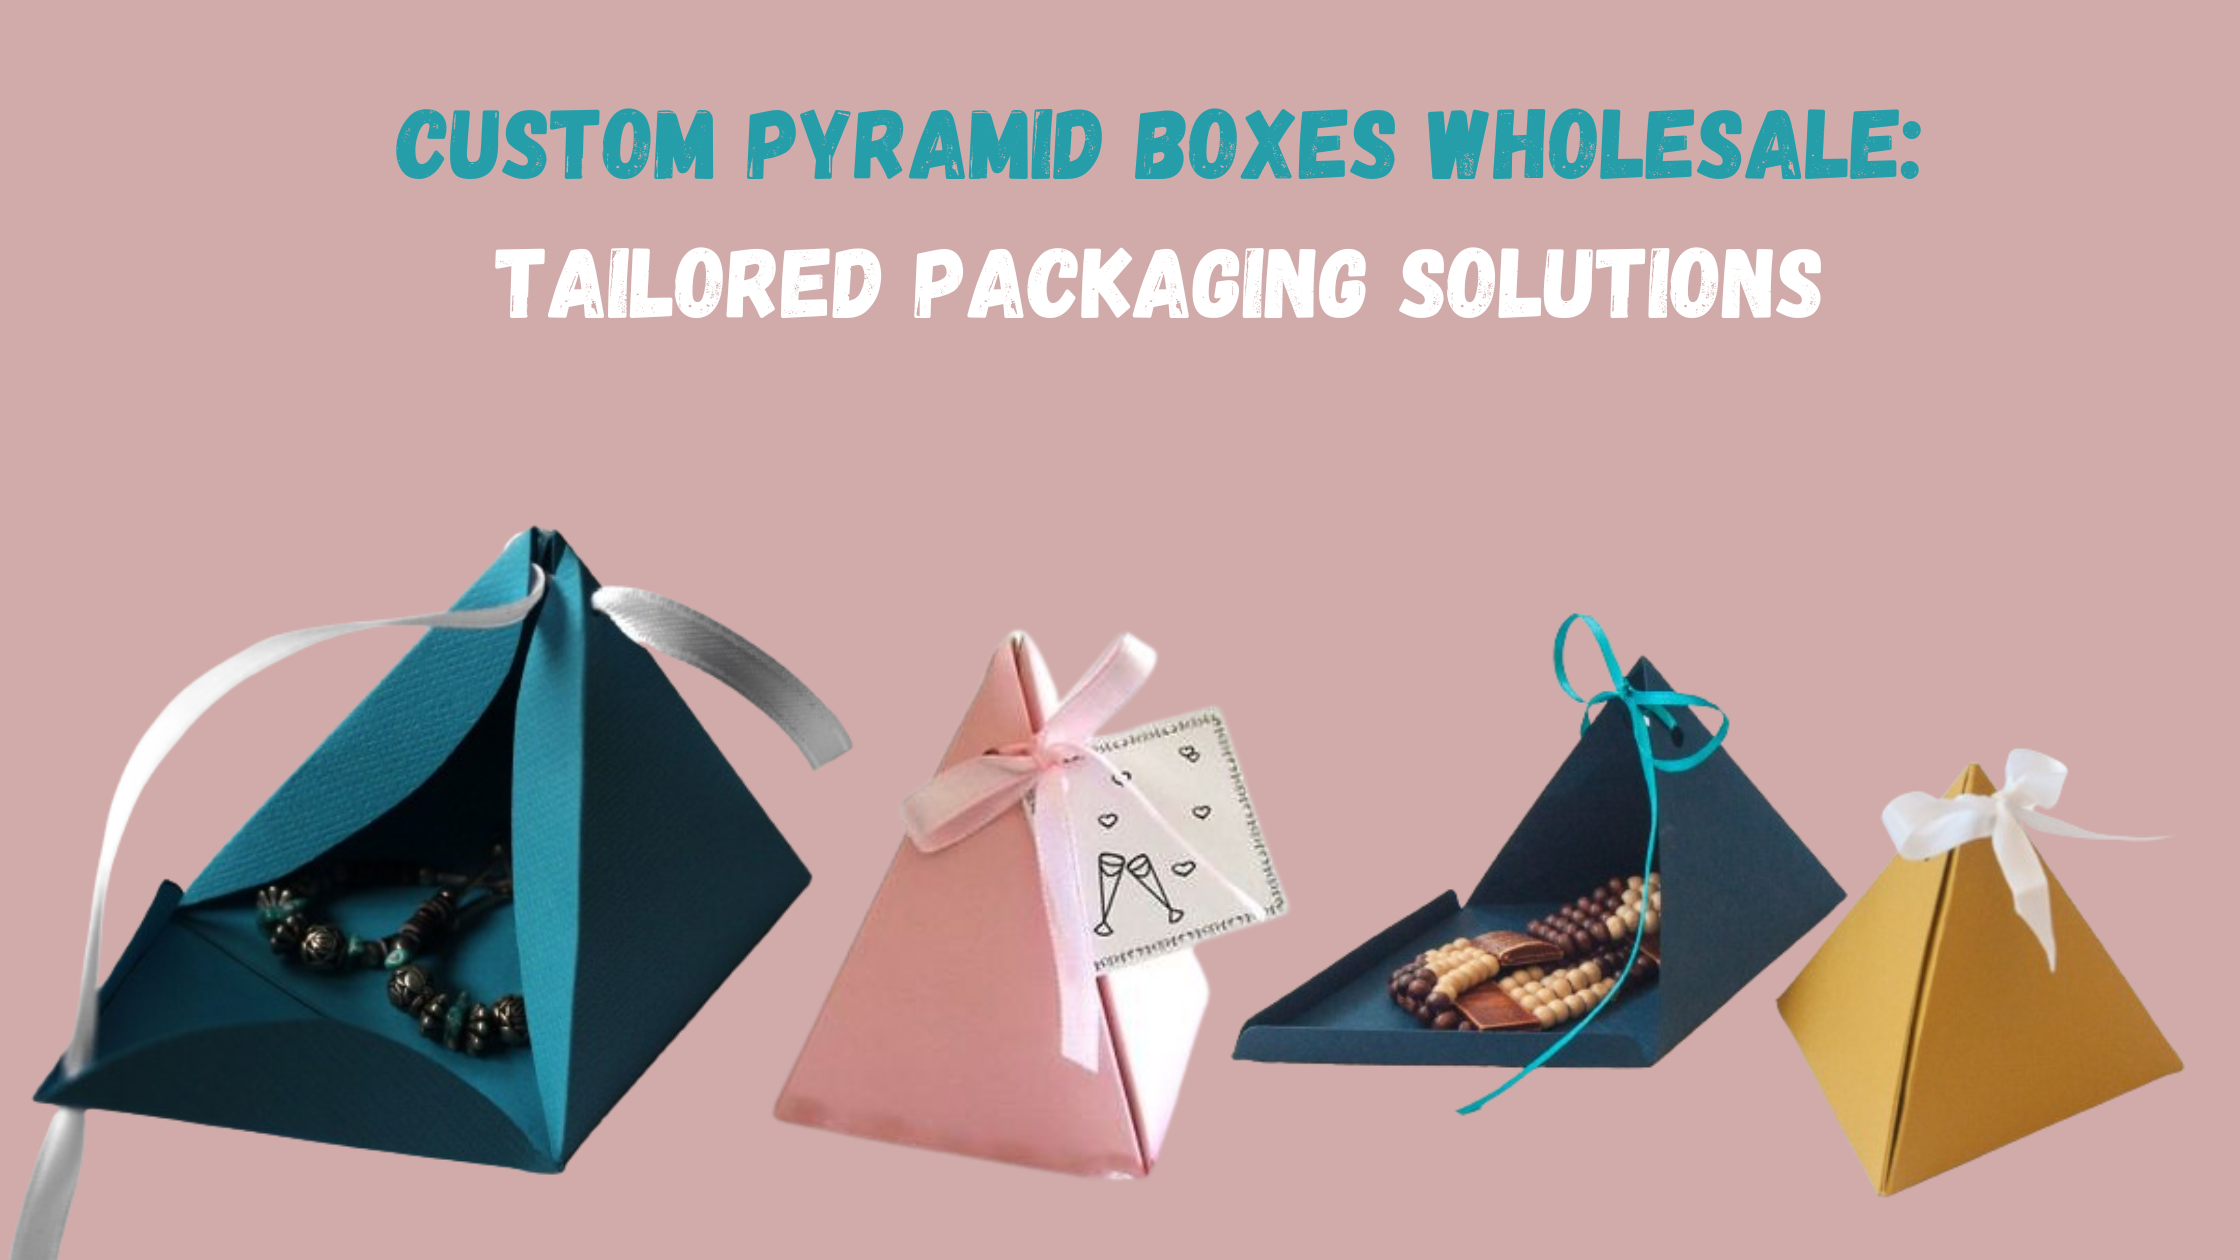 Custom Pyramid Boxes Wholesale Tailored Packaging Solutions